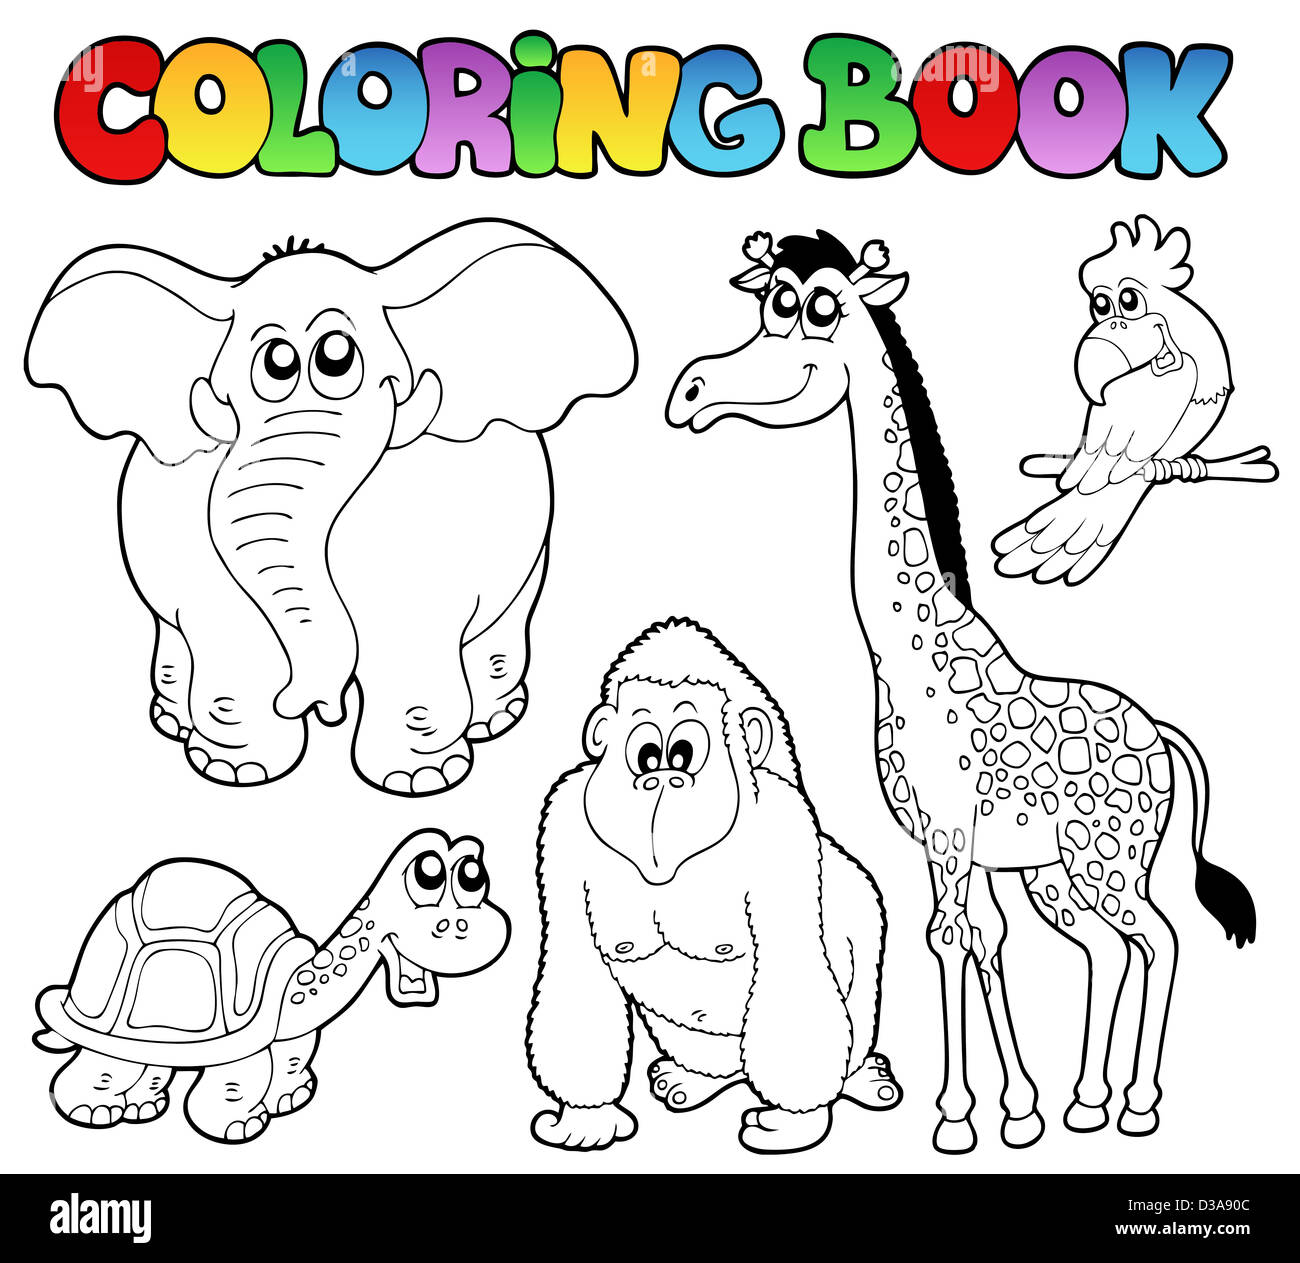 Coloring book tropical animals 2 - picture illustration. Stock Photo